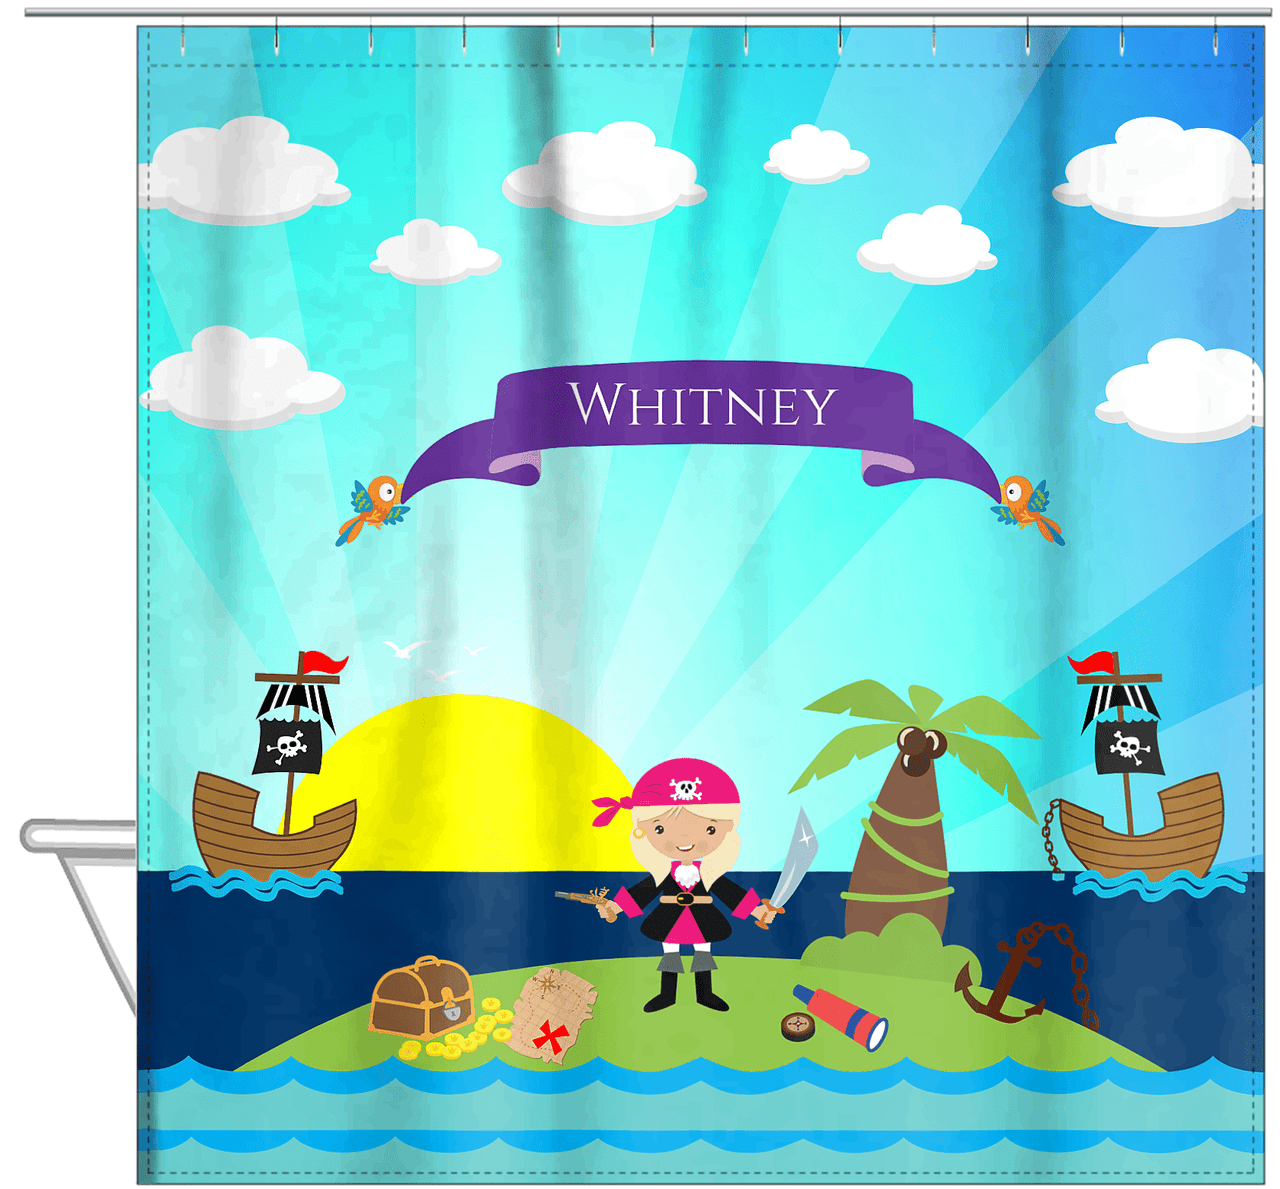 Personalized Pirate Shower Curtain XVI - Blue Background - Blonde Girl with Sword - Hanging View